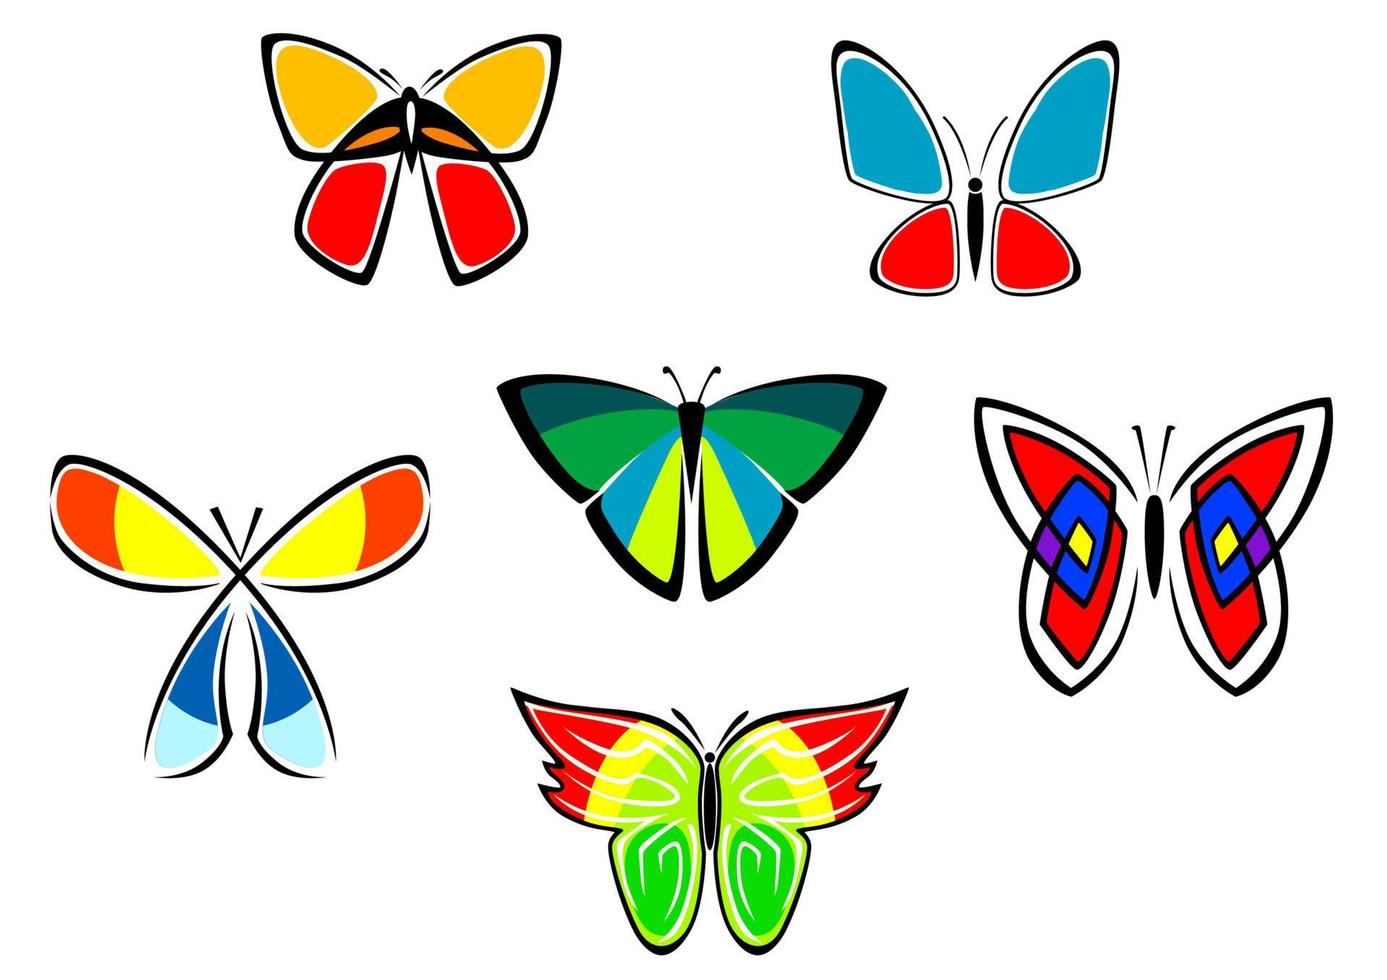 Colorful butterfly icons and tattoos vector